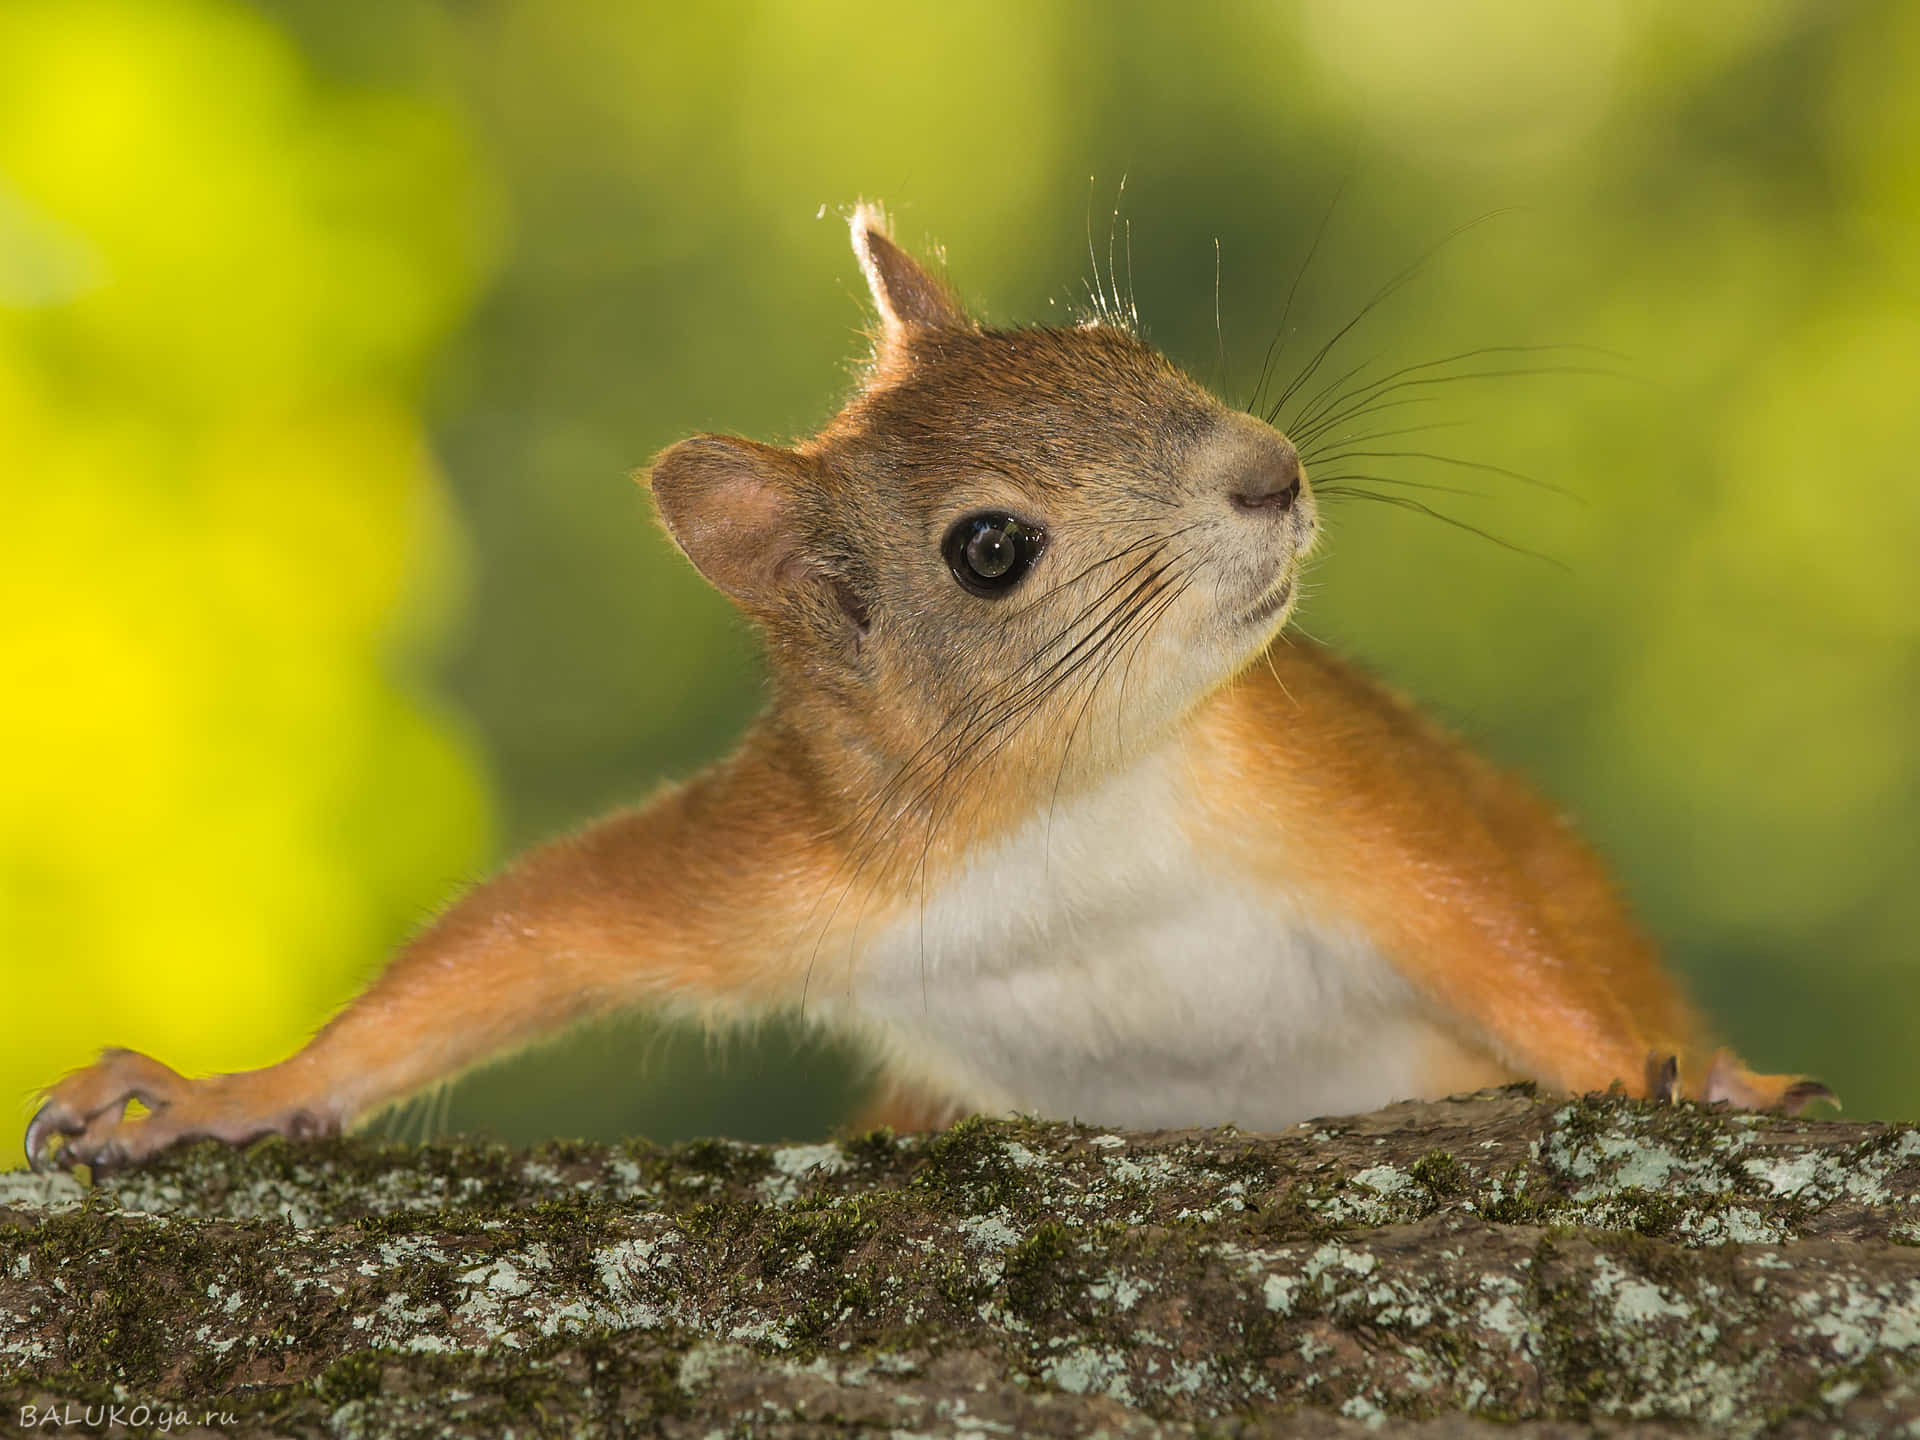 A squirrel, standing tall atop a tree branch